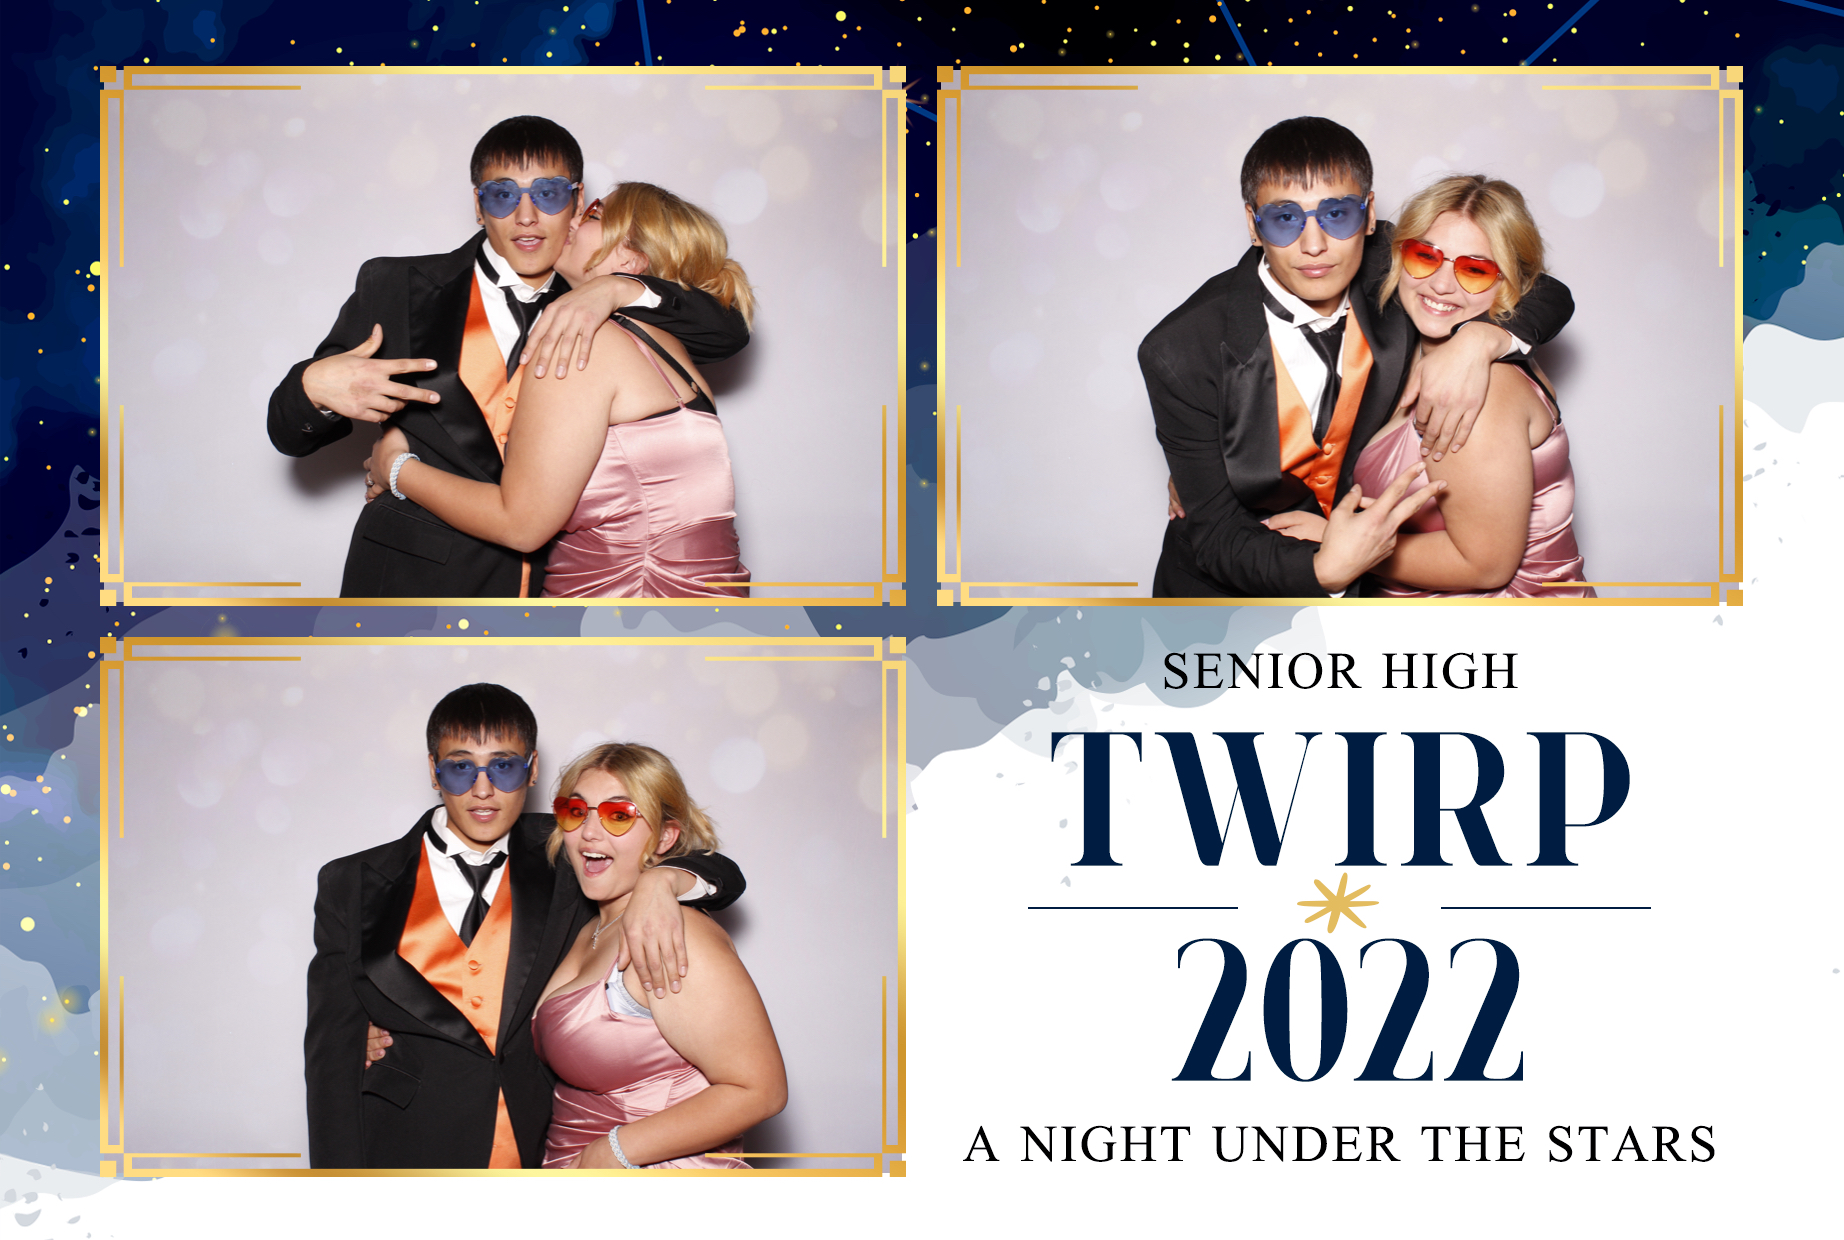 Sample photo from a twirp dance